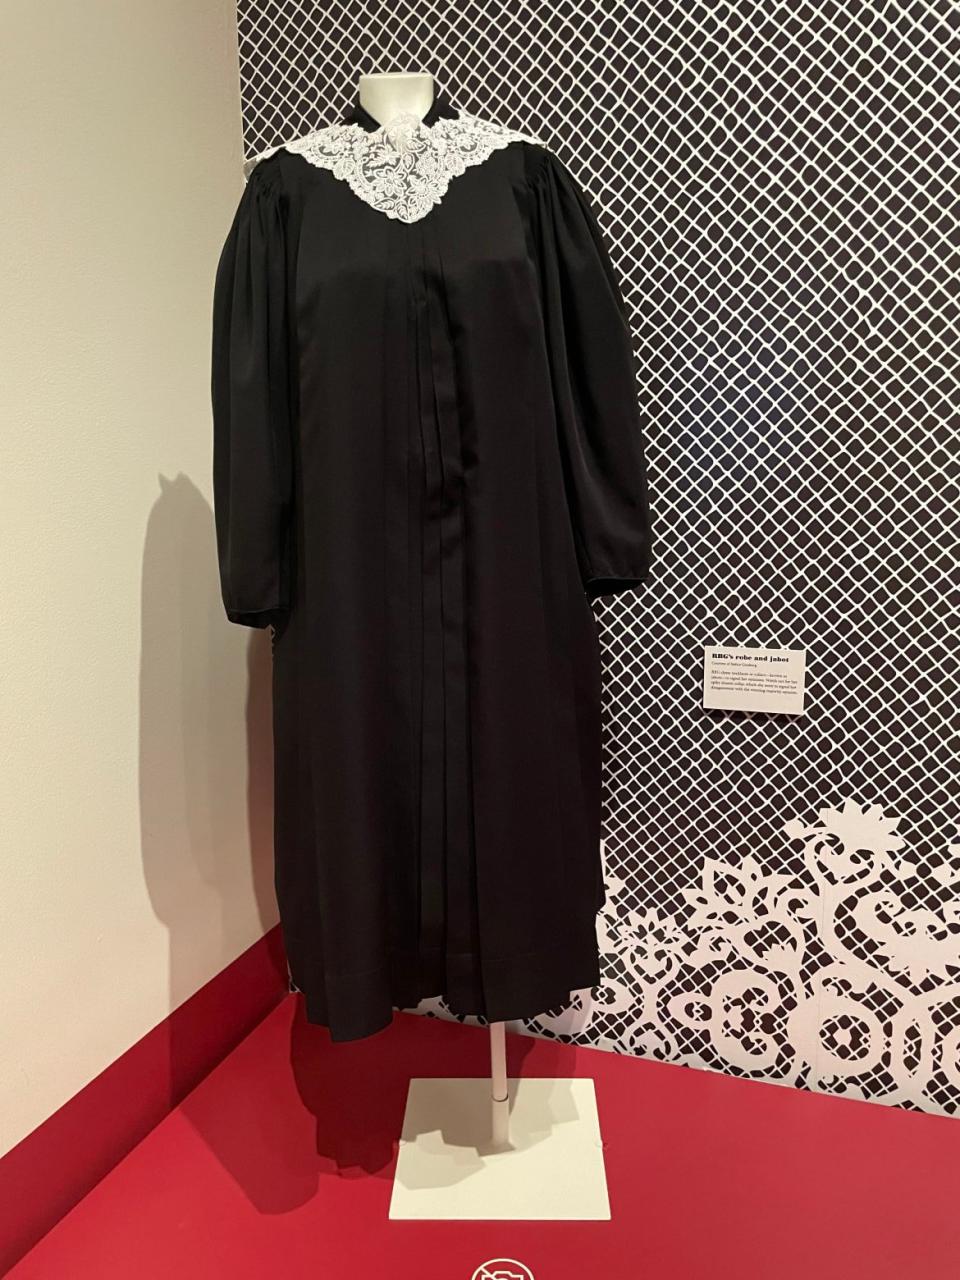 <div class="inline-image__caption"><p>One of Justice Ruth Bader Ginsburg's robes.</p></div> <div class="inline-image__credit">Alaina Demopoulos</div>